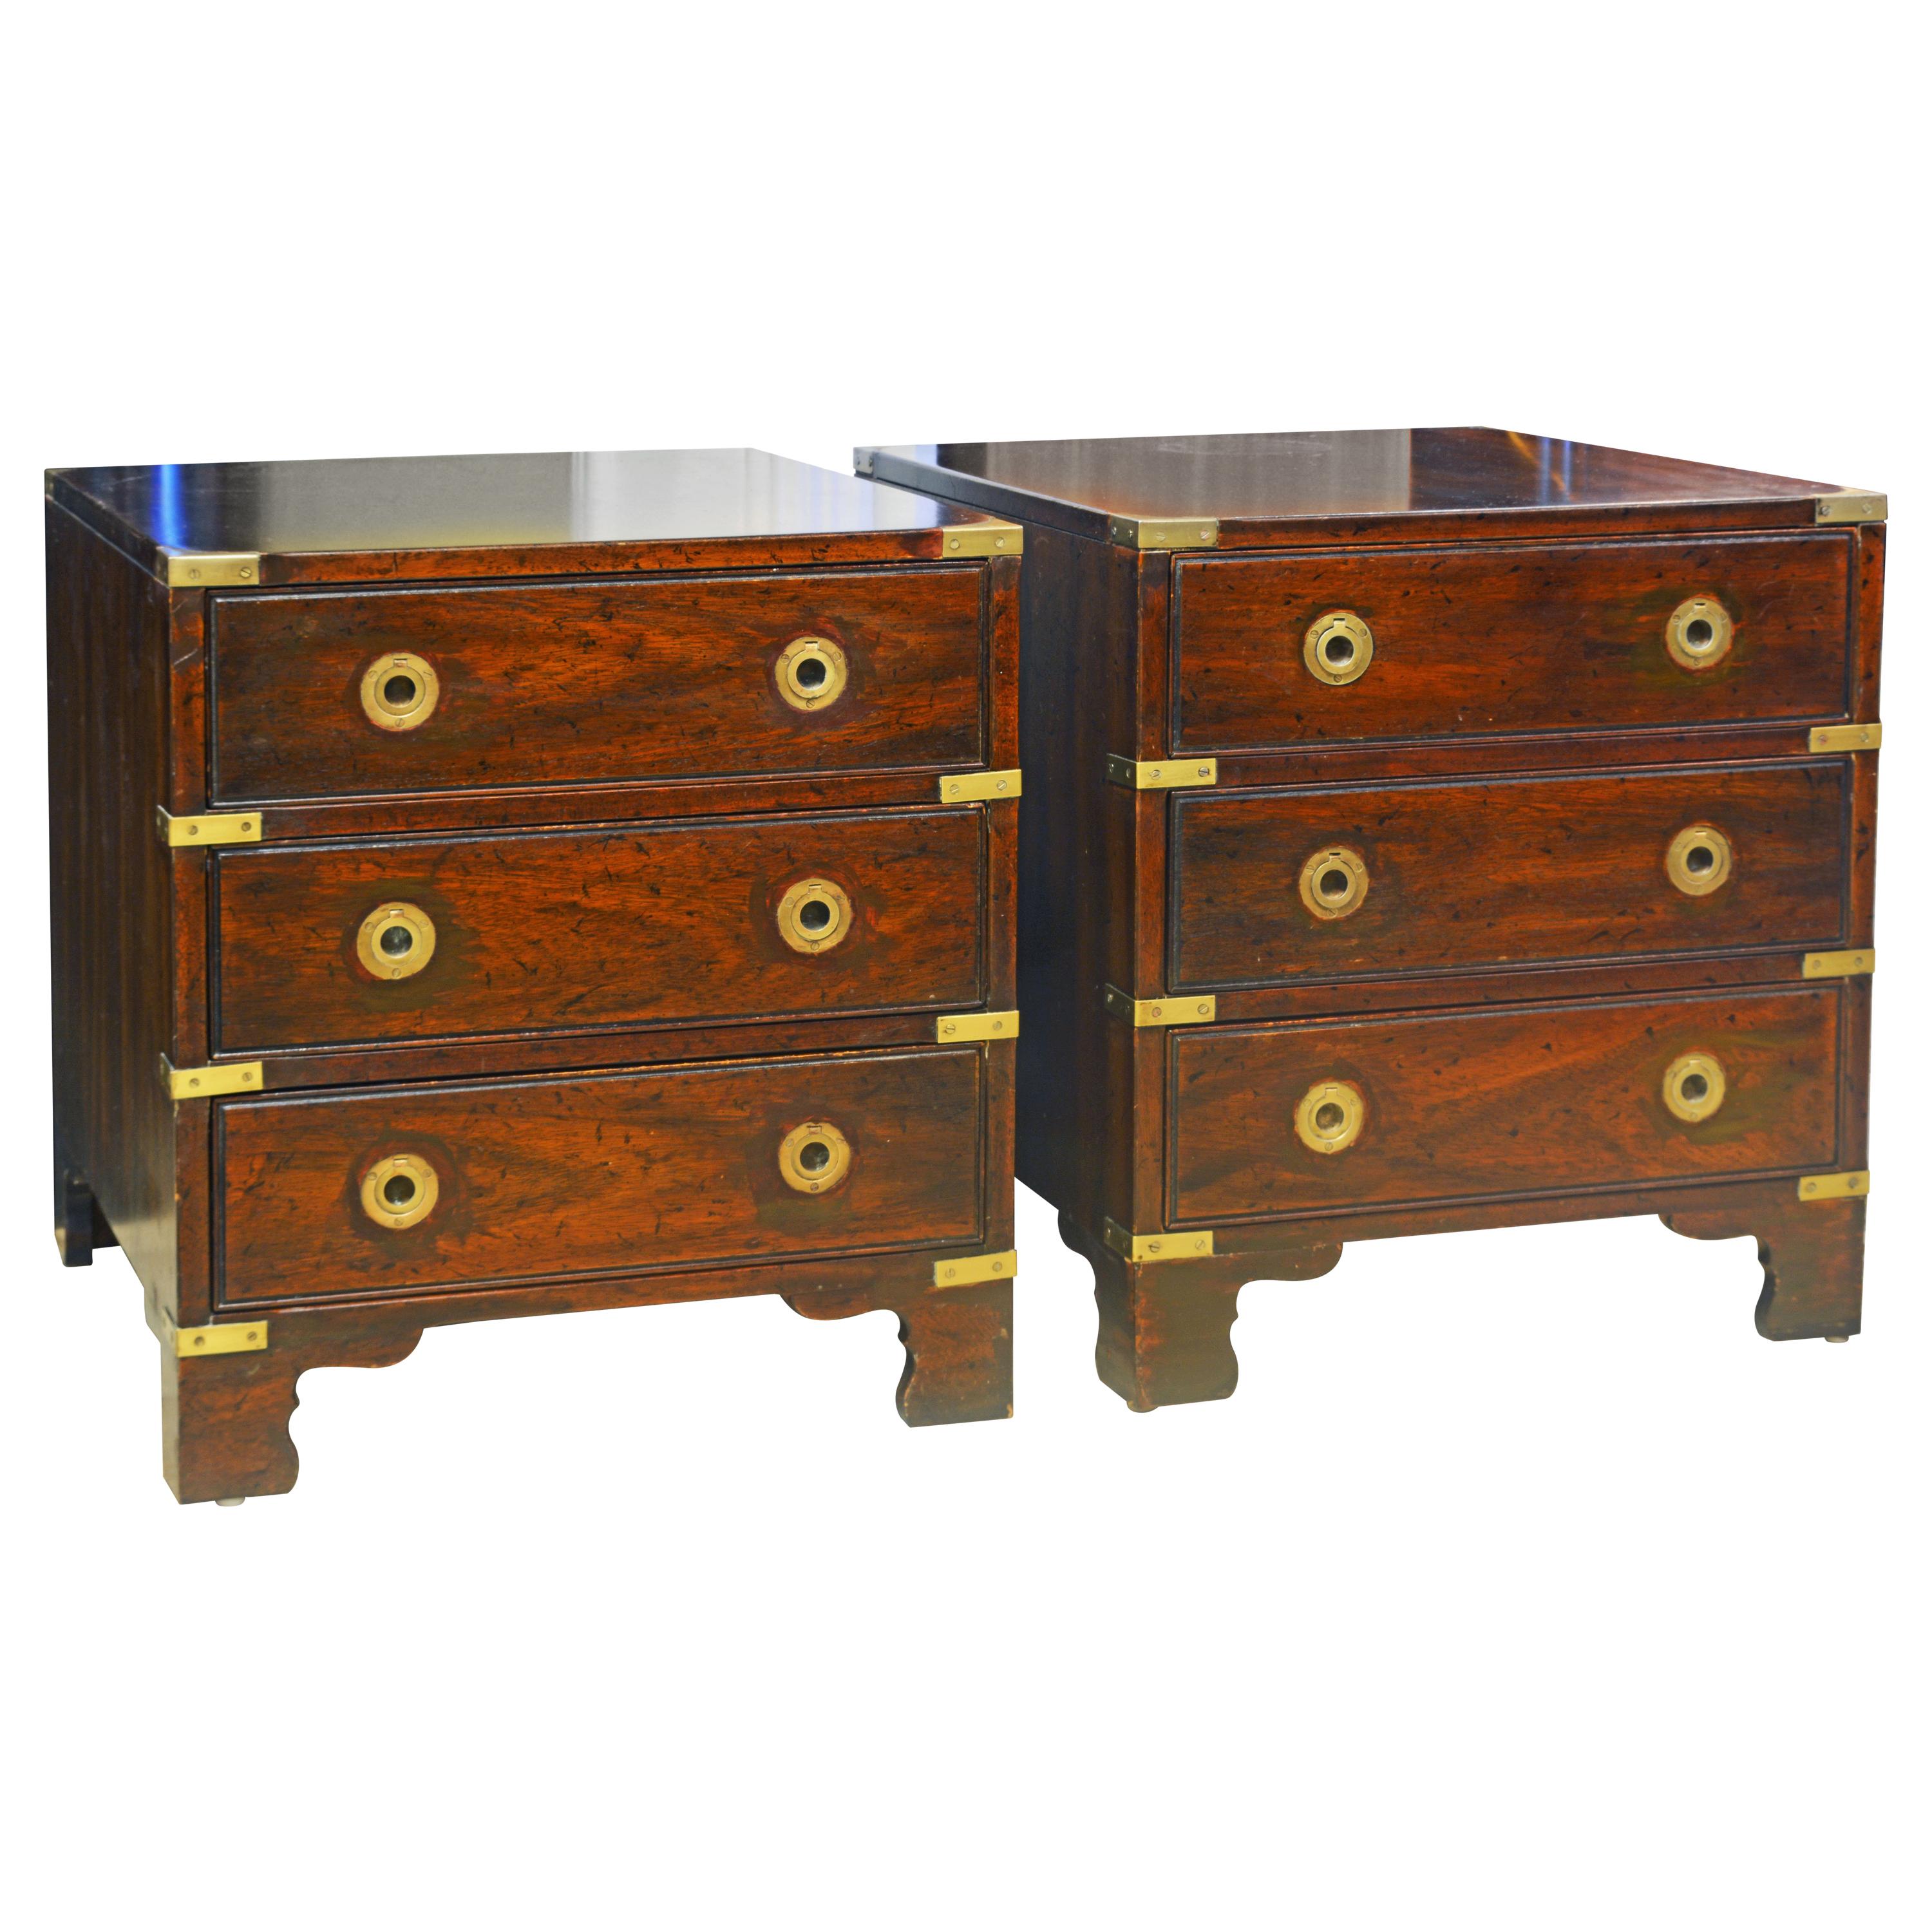 Pair of Midcentury Mahogany Campaign Style Three Drawer Chests w. Brass Accents